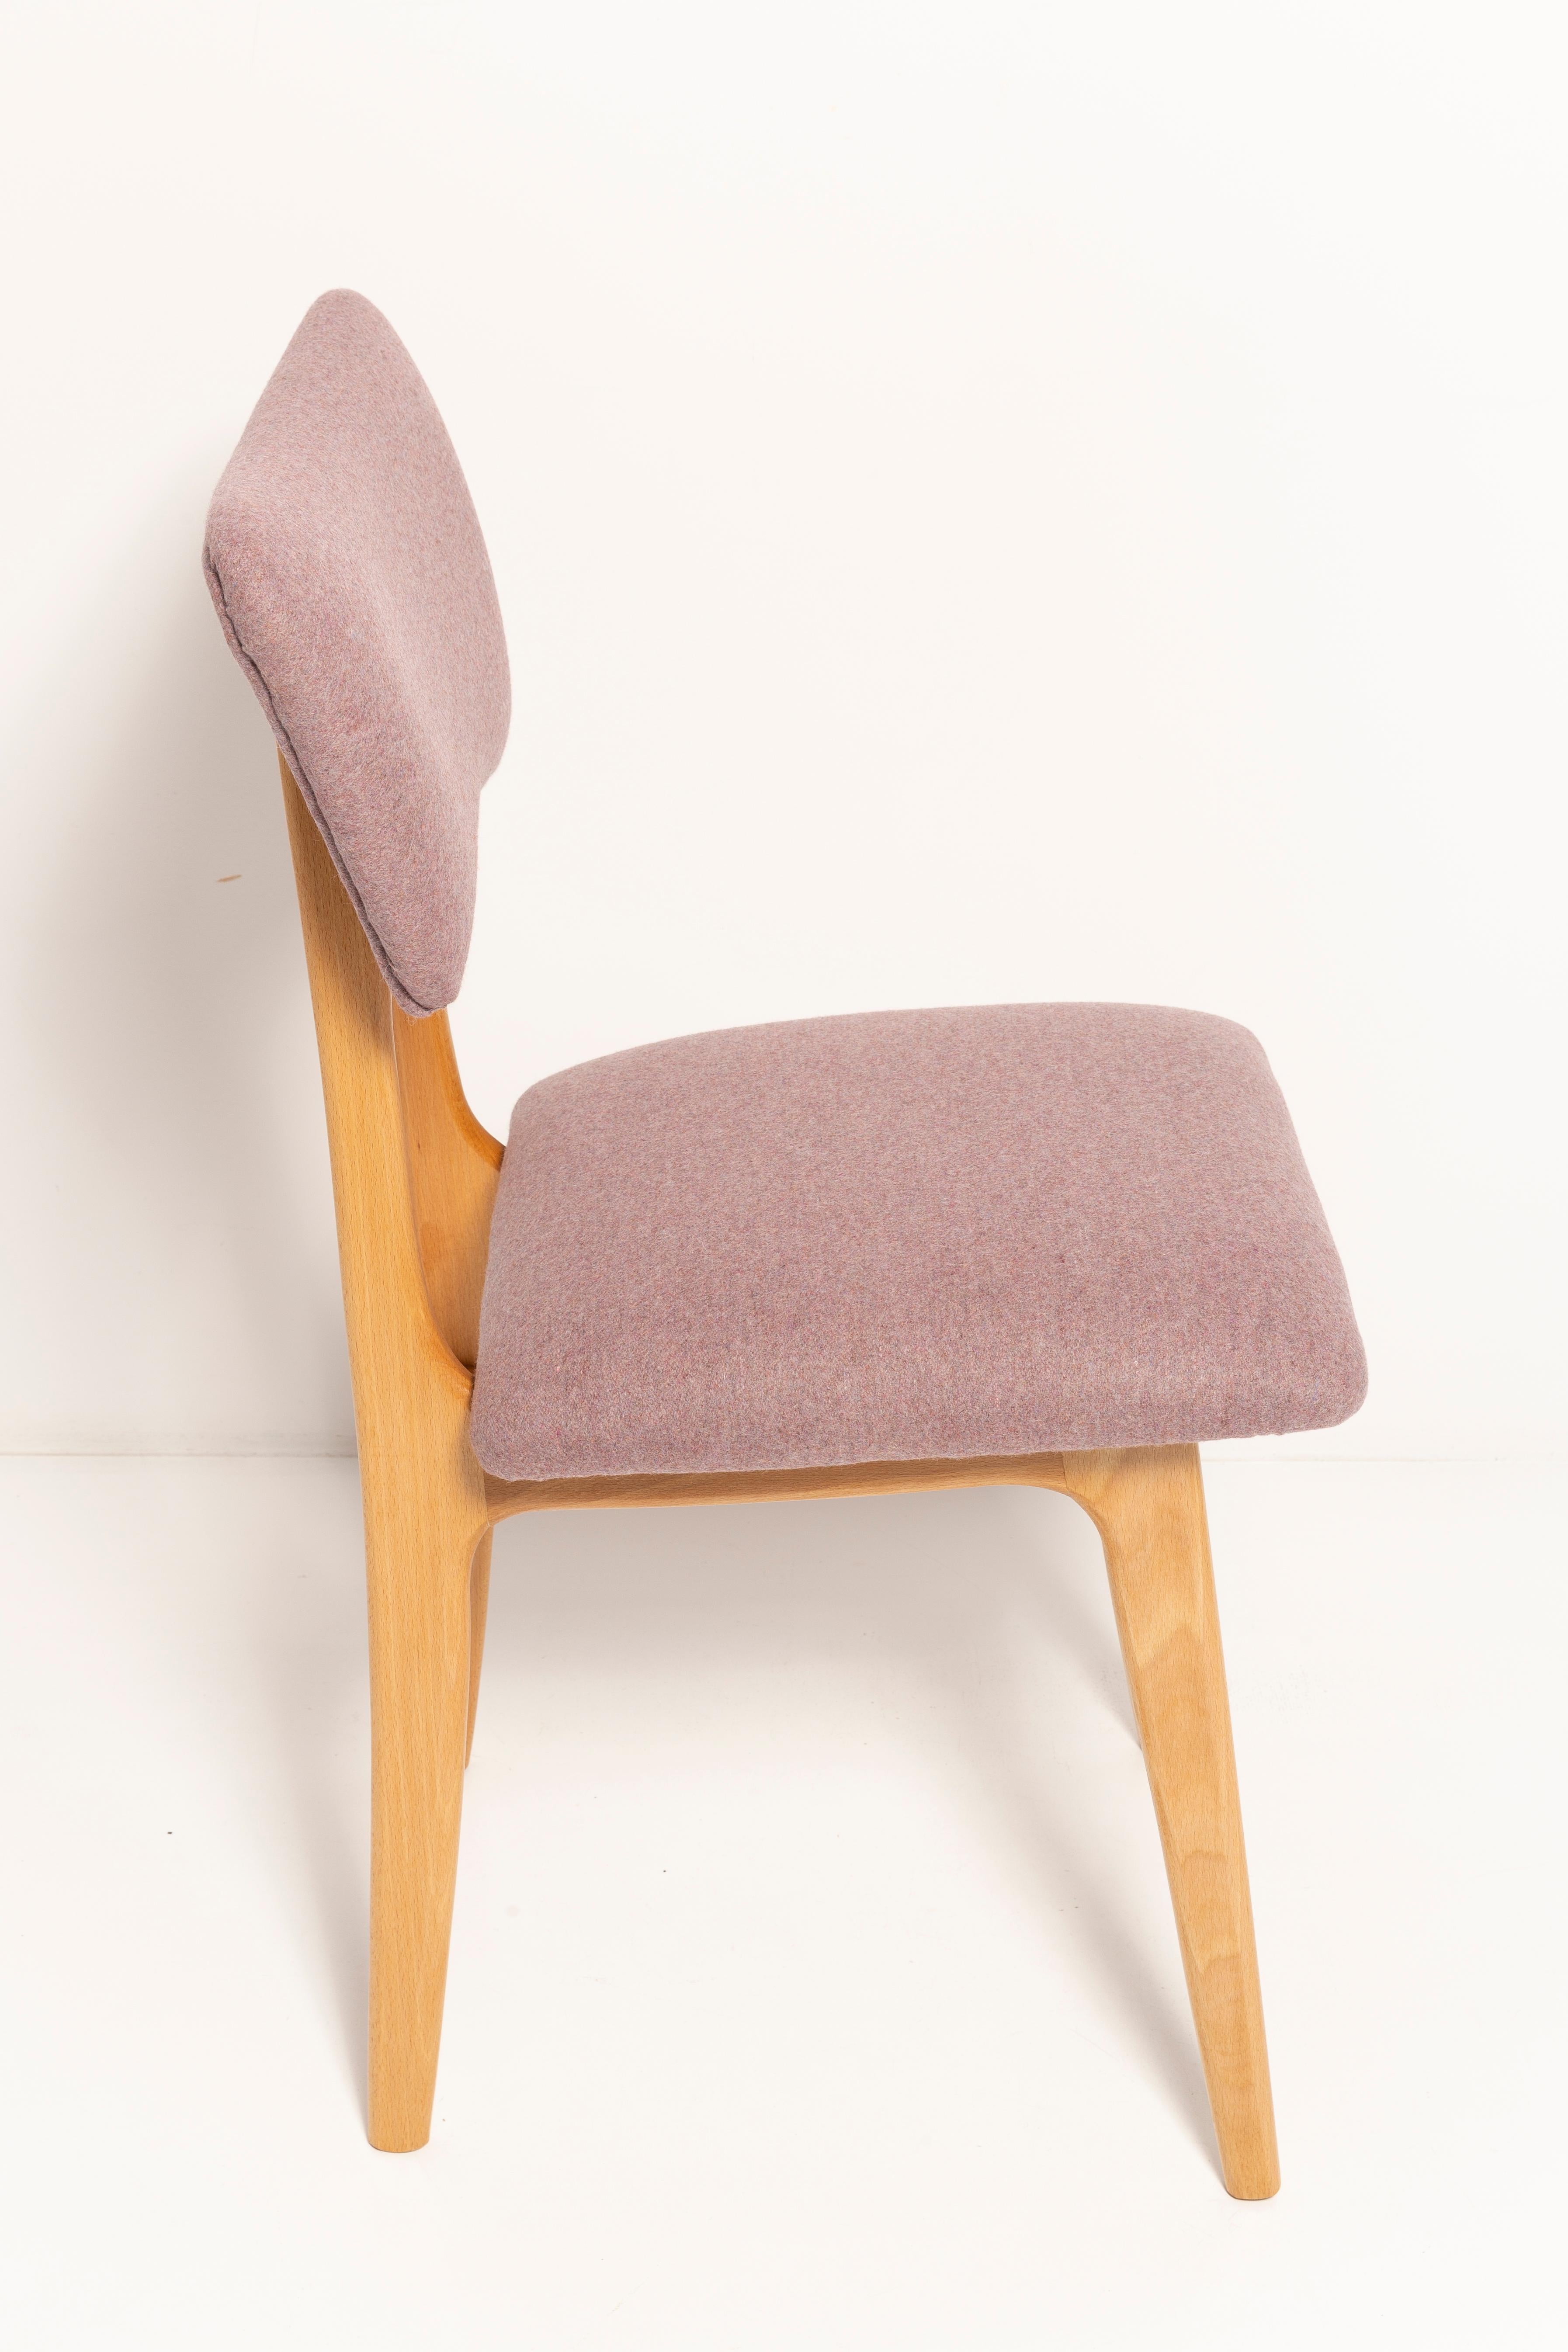 20th Century Butterfly Dining Chair, Pink Wool, Light Wood, Europe, 1960s For Sale 2